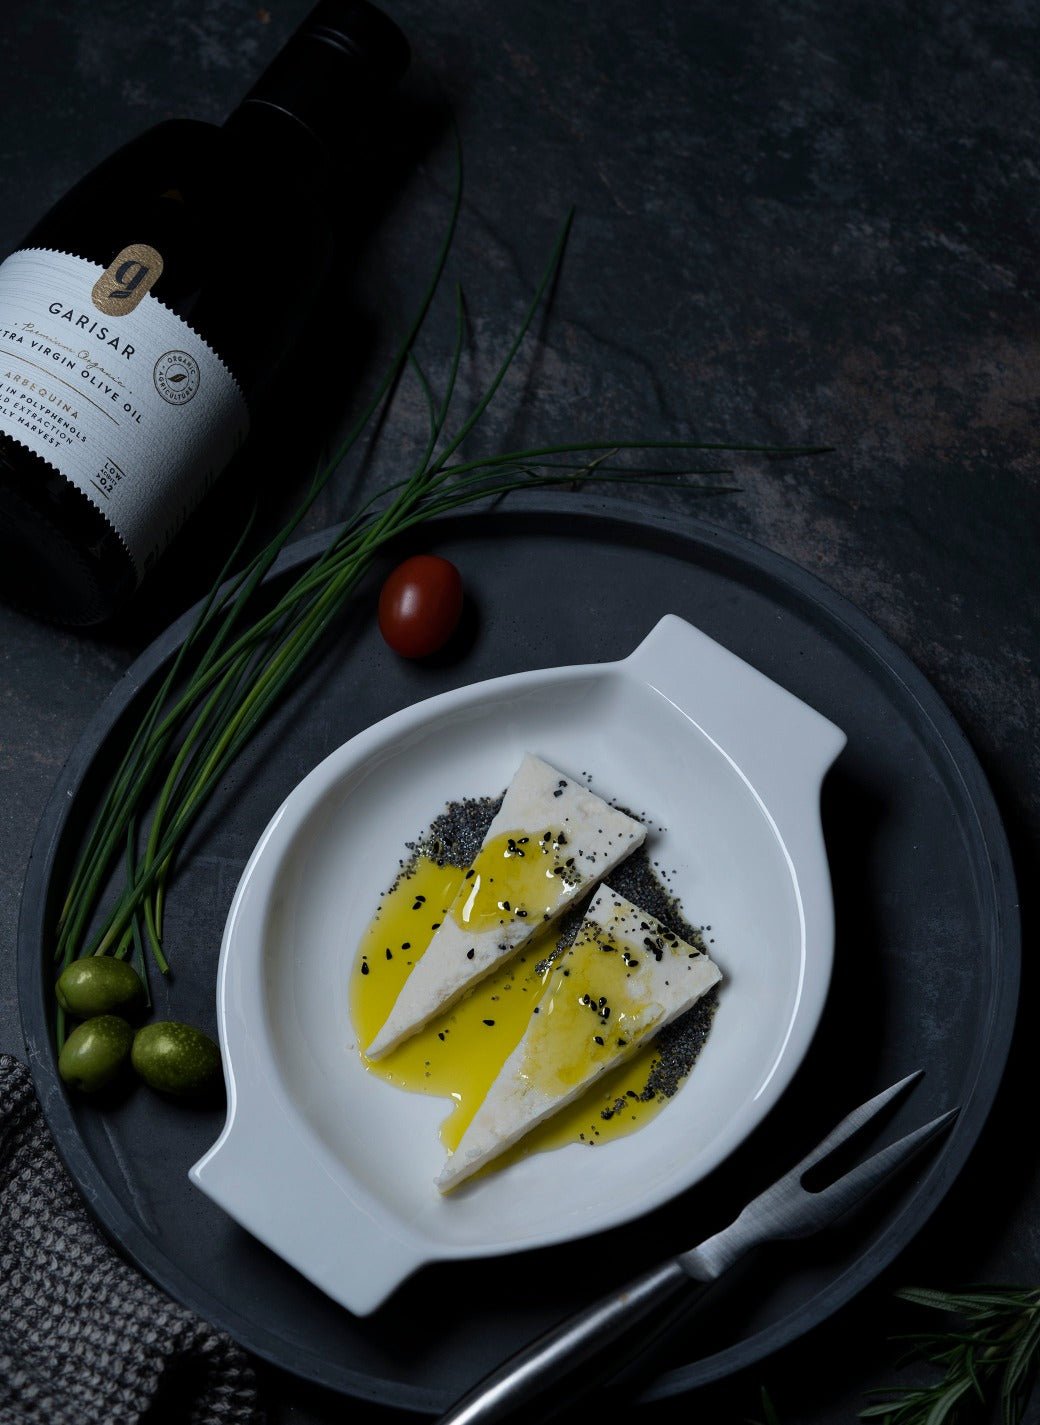 Arbequina High Polyphenol Extra Virgin Olive Oil, NYIOOC GOLD MEDAL Winner - Garisar